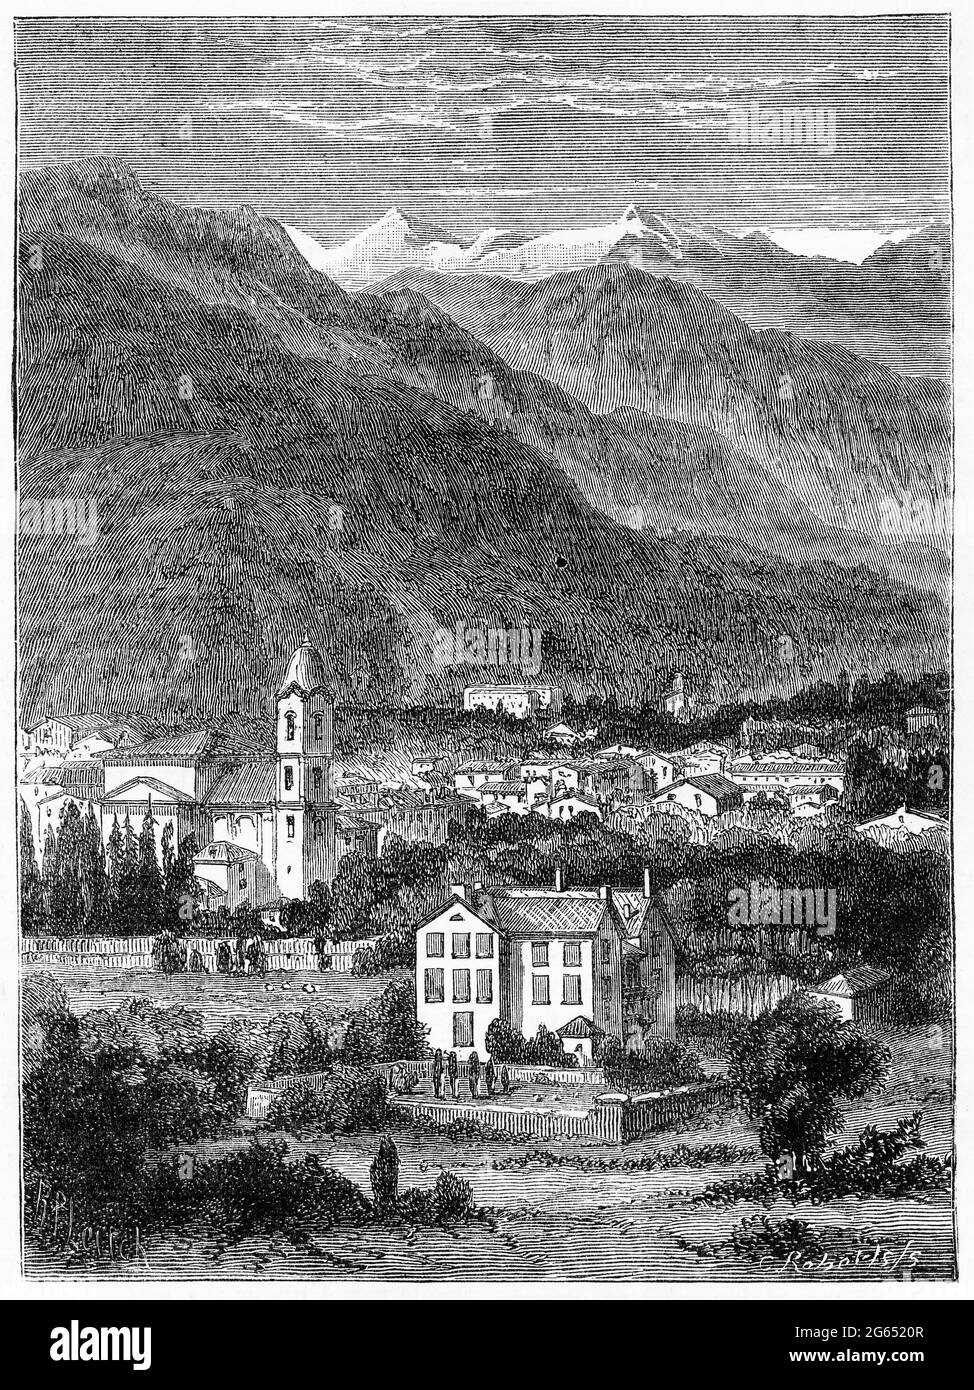 Engraving of La Torre, Spain in the 1500s. La Torre is now a municipality composed of the districts of Balbarda, Blacha, Guareña, Oco and Sanchicorto,  in the province of Ávila, Castile and León, Spain Stock Photo